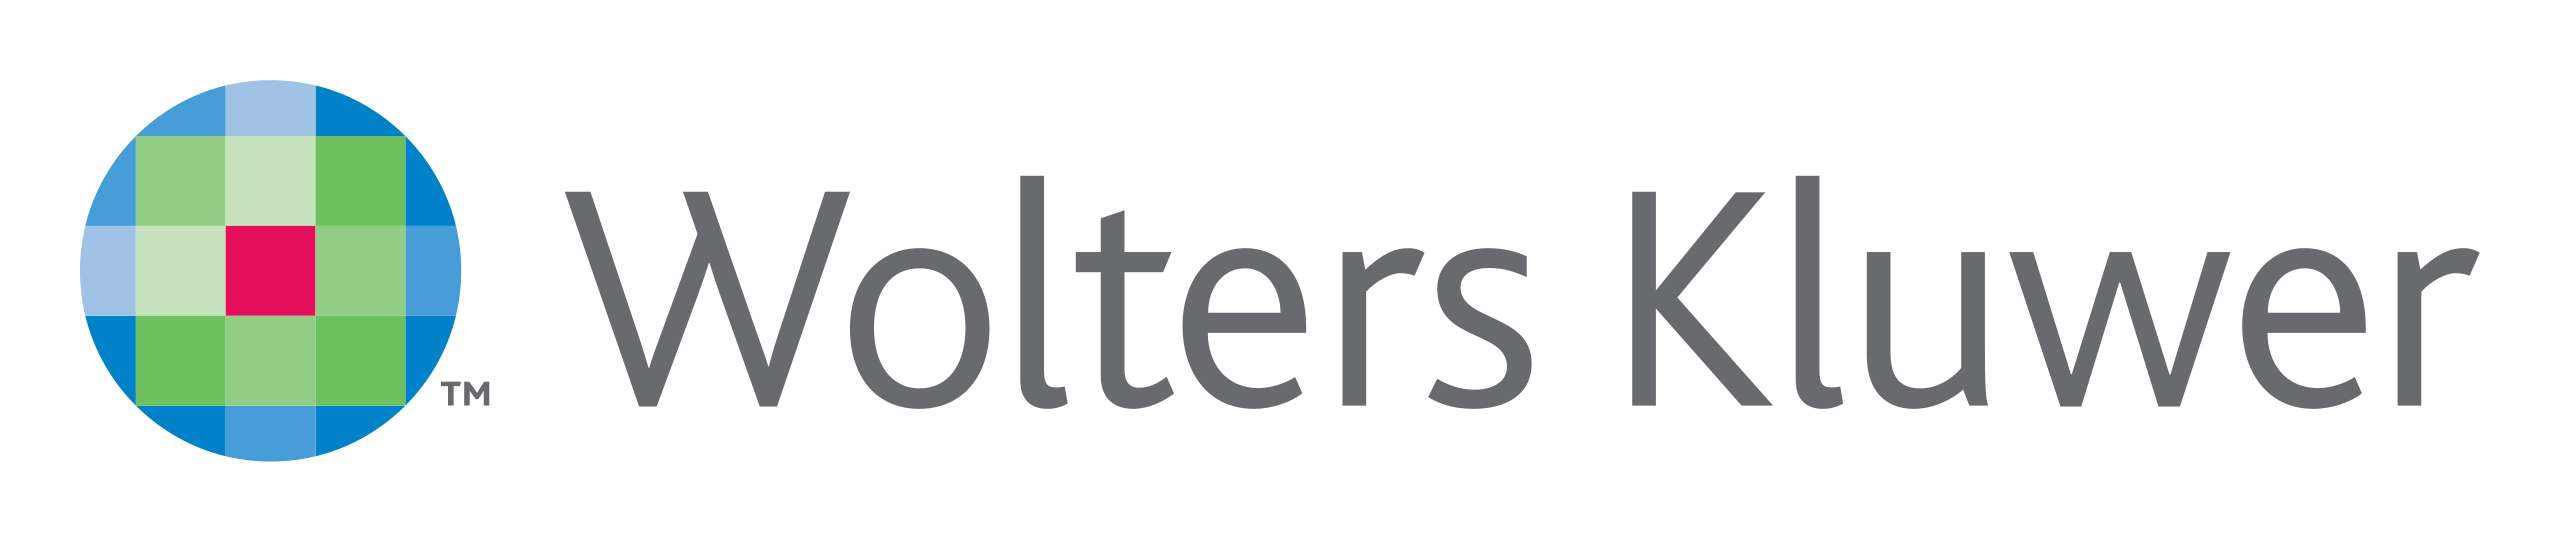 Wolters Kluwer Hiring Associate Product Software Engineer 